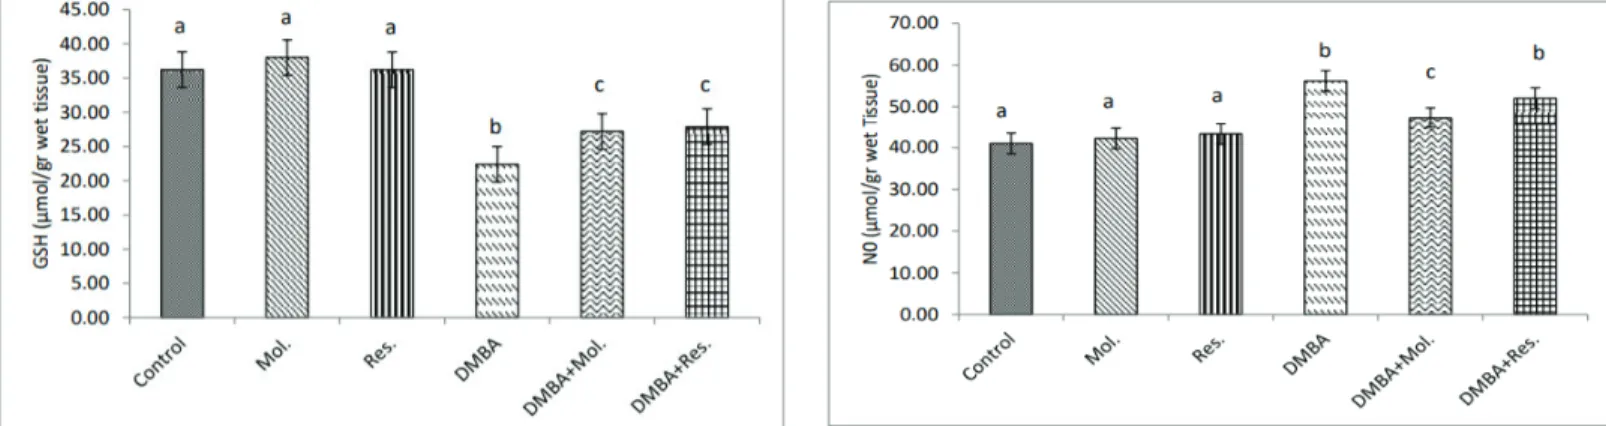 Figure 2. Comparison  of  NO  results.  Different  letters  indicate  the  statistical  difference between the groups (p&lt;0.05)